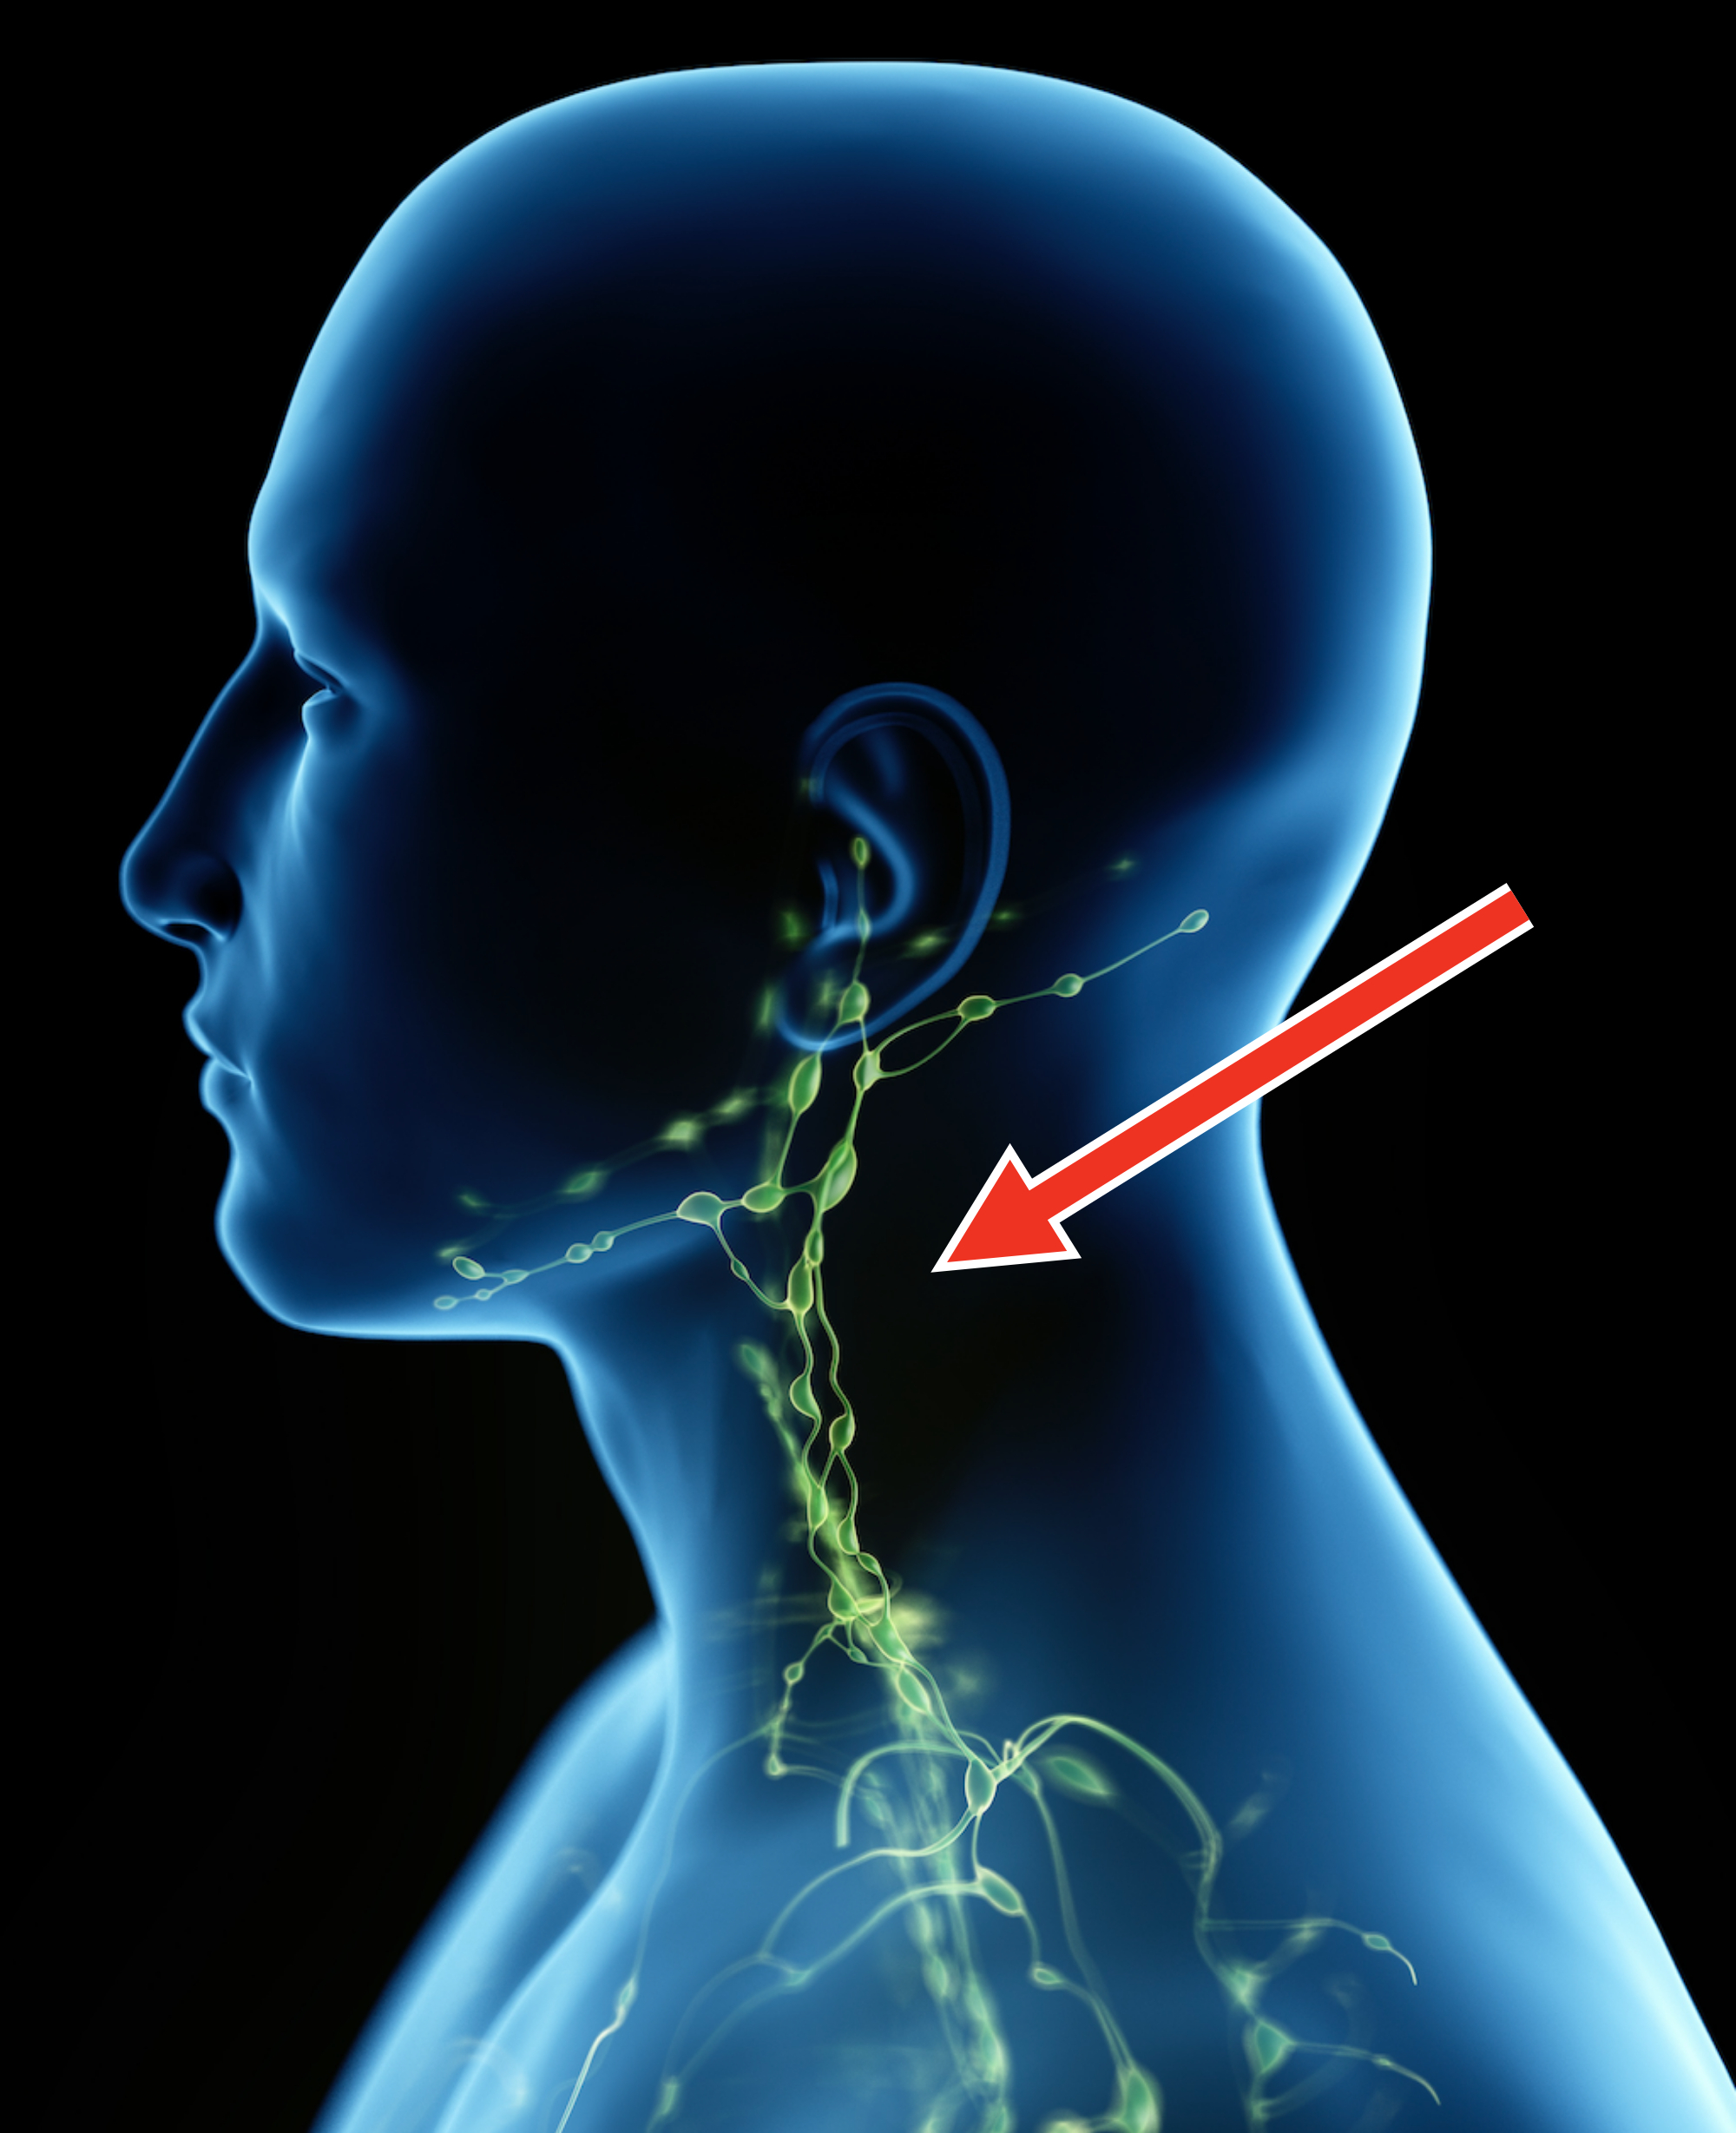 A digital illustration of a human&#x27;s lymphatic system from the neck up, highlighting nodes and pathways